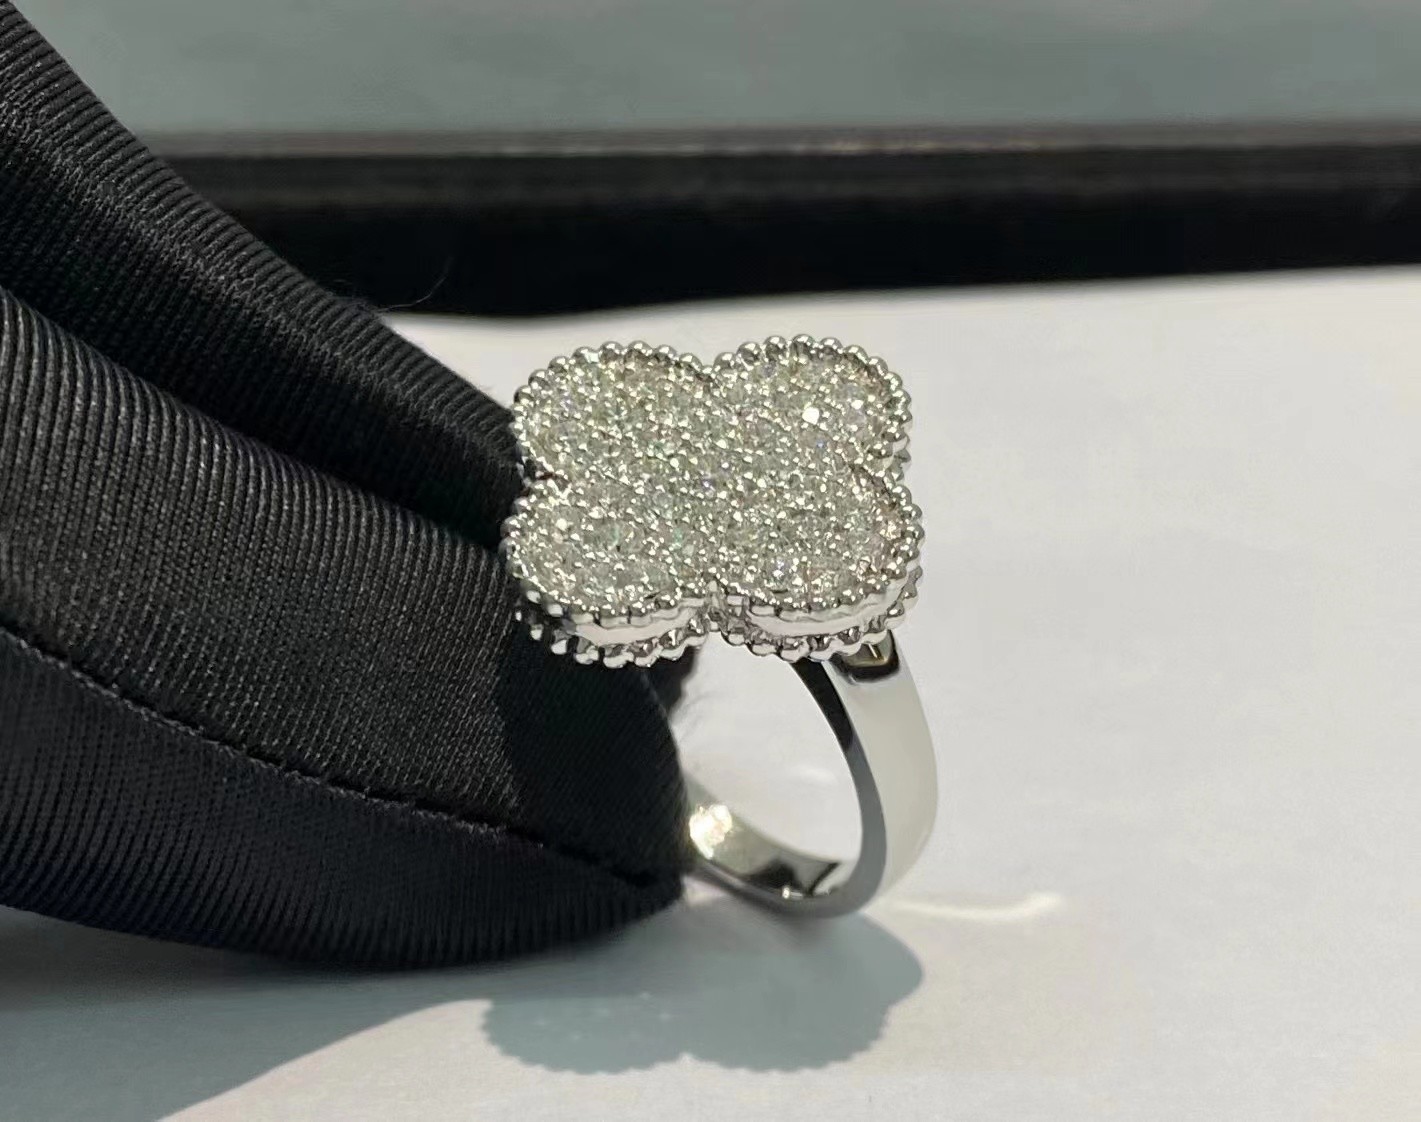  Authentic Van Cleef Arpels 18K White Gold Diamond Paved Magic Alhambra Ring jewelry supplier wholesale Manufactures